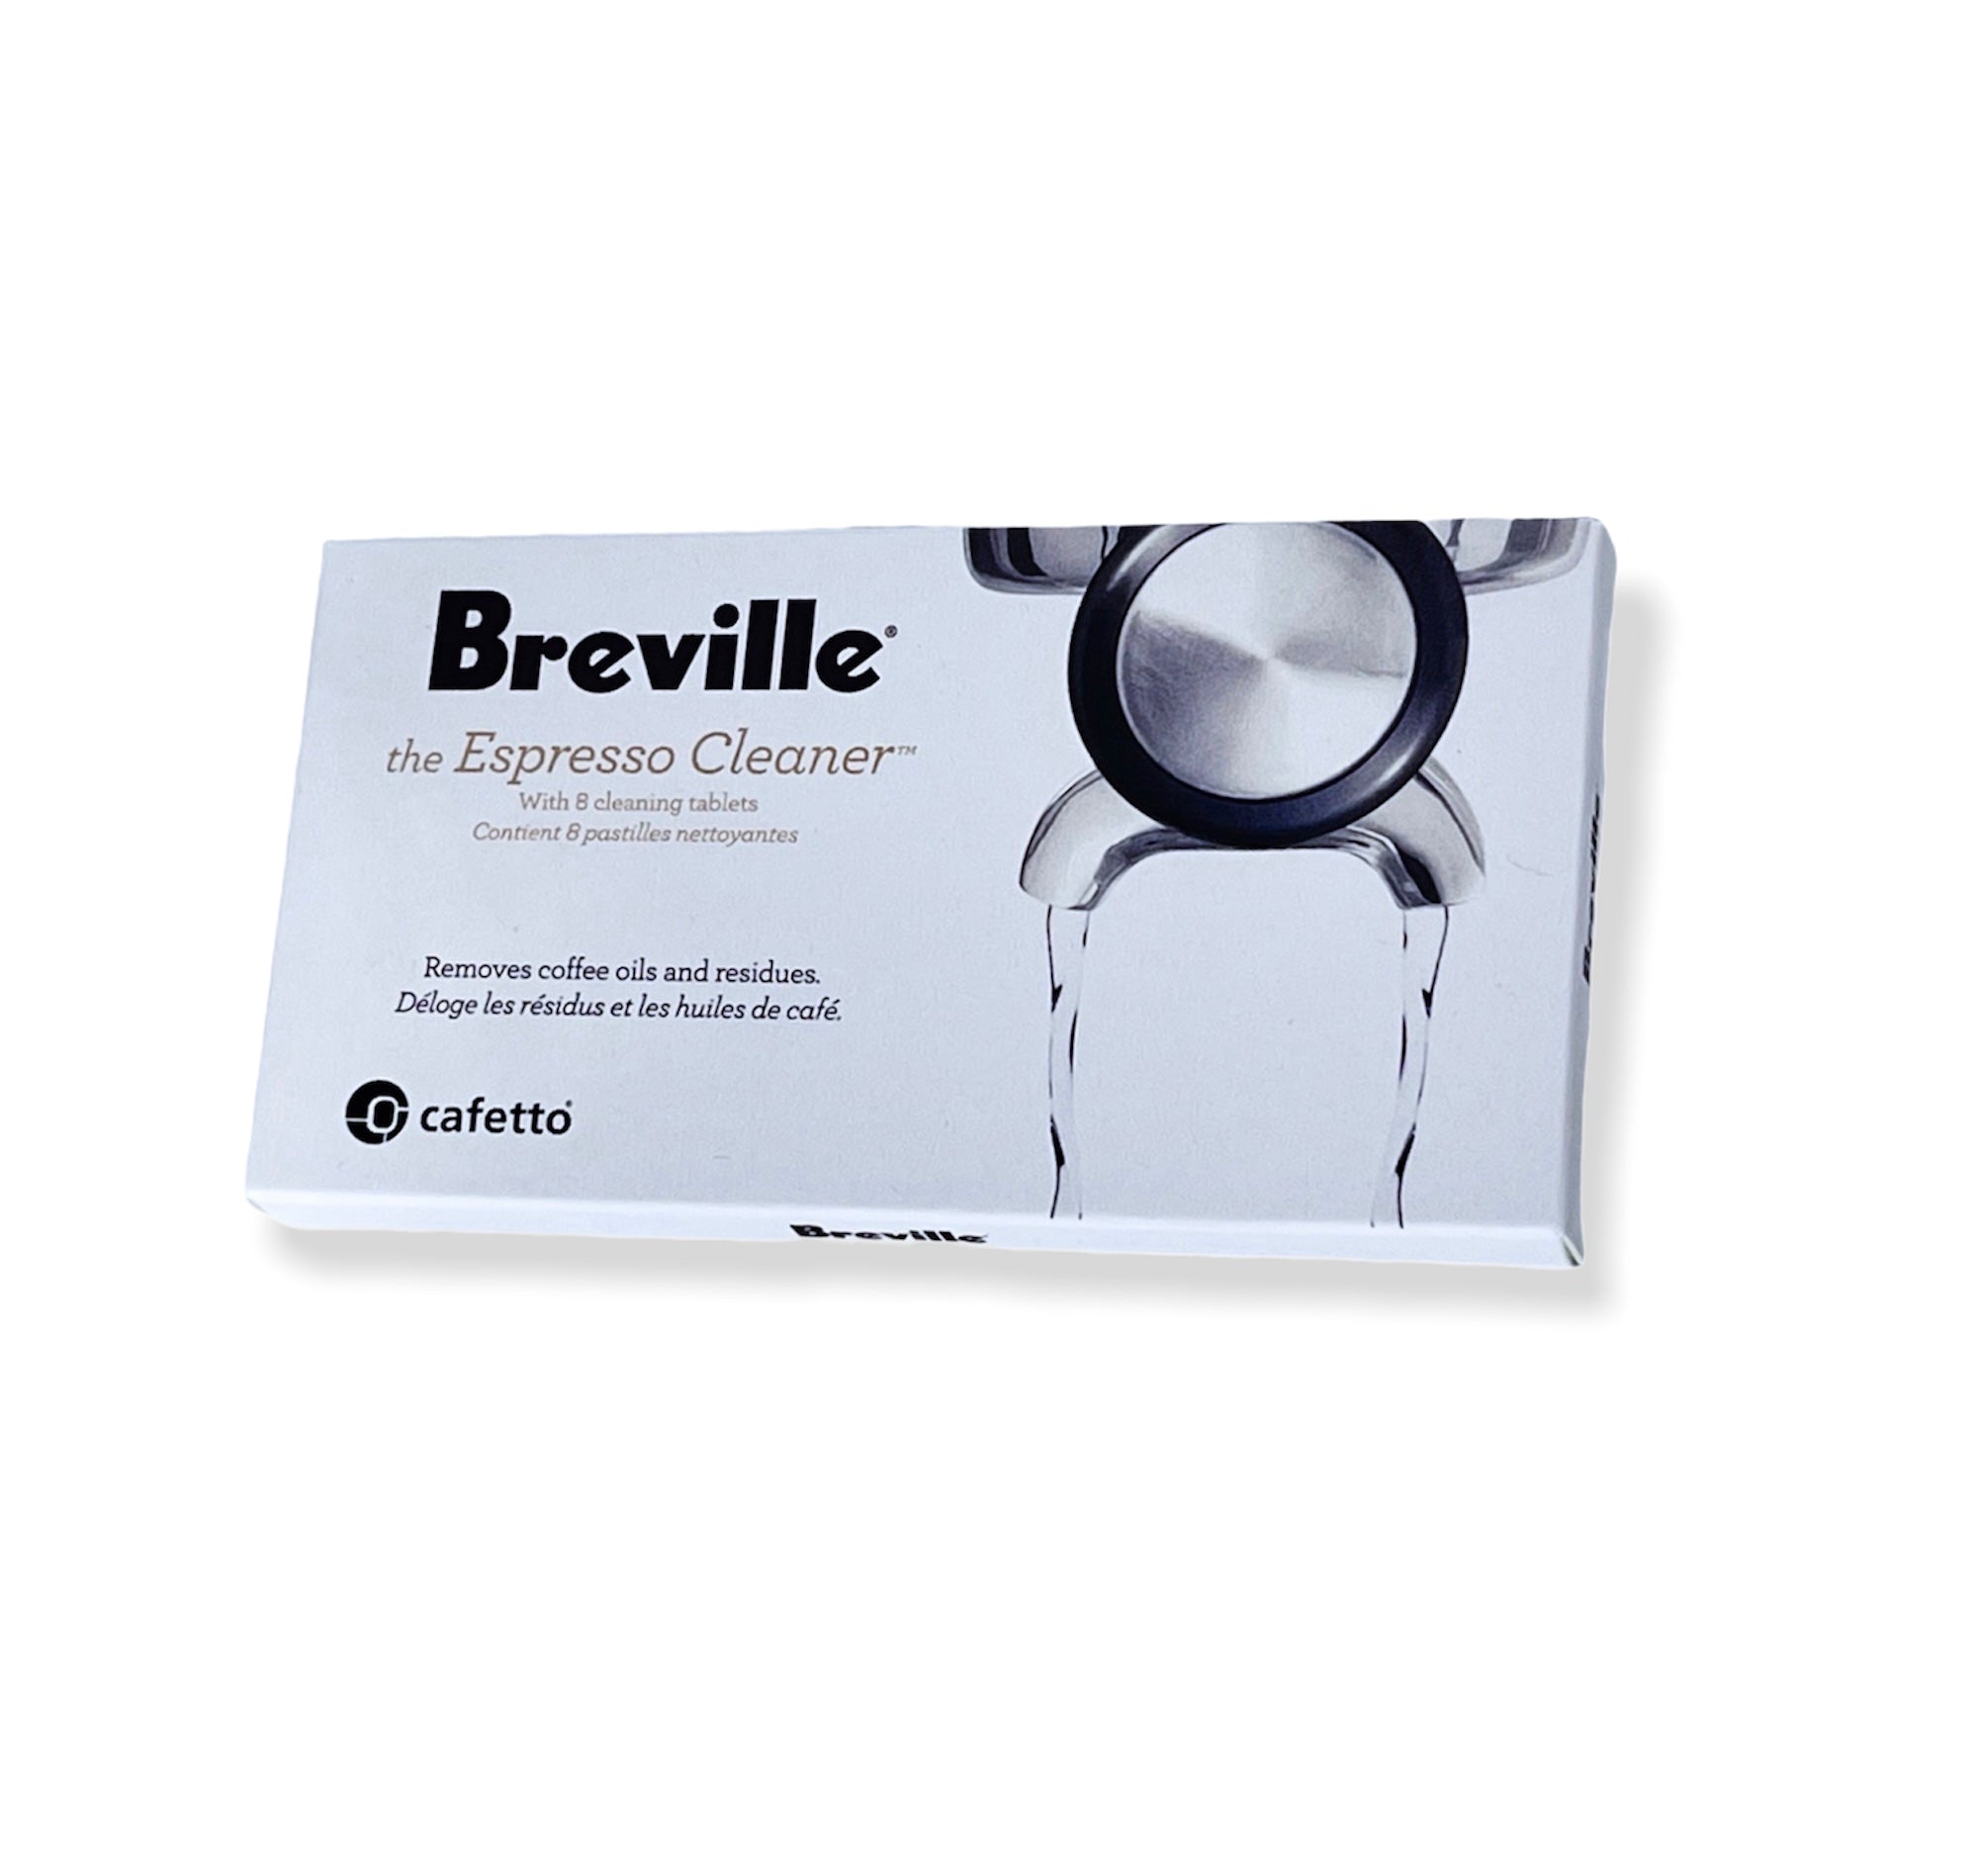 Breville espresso cleaner tablets for espresso machine, removes coffee oils and residues